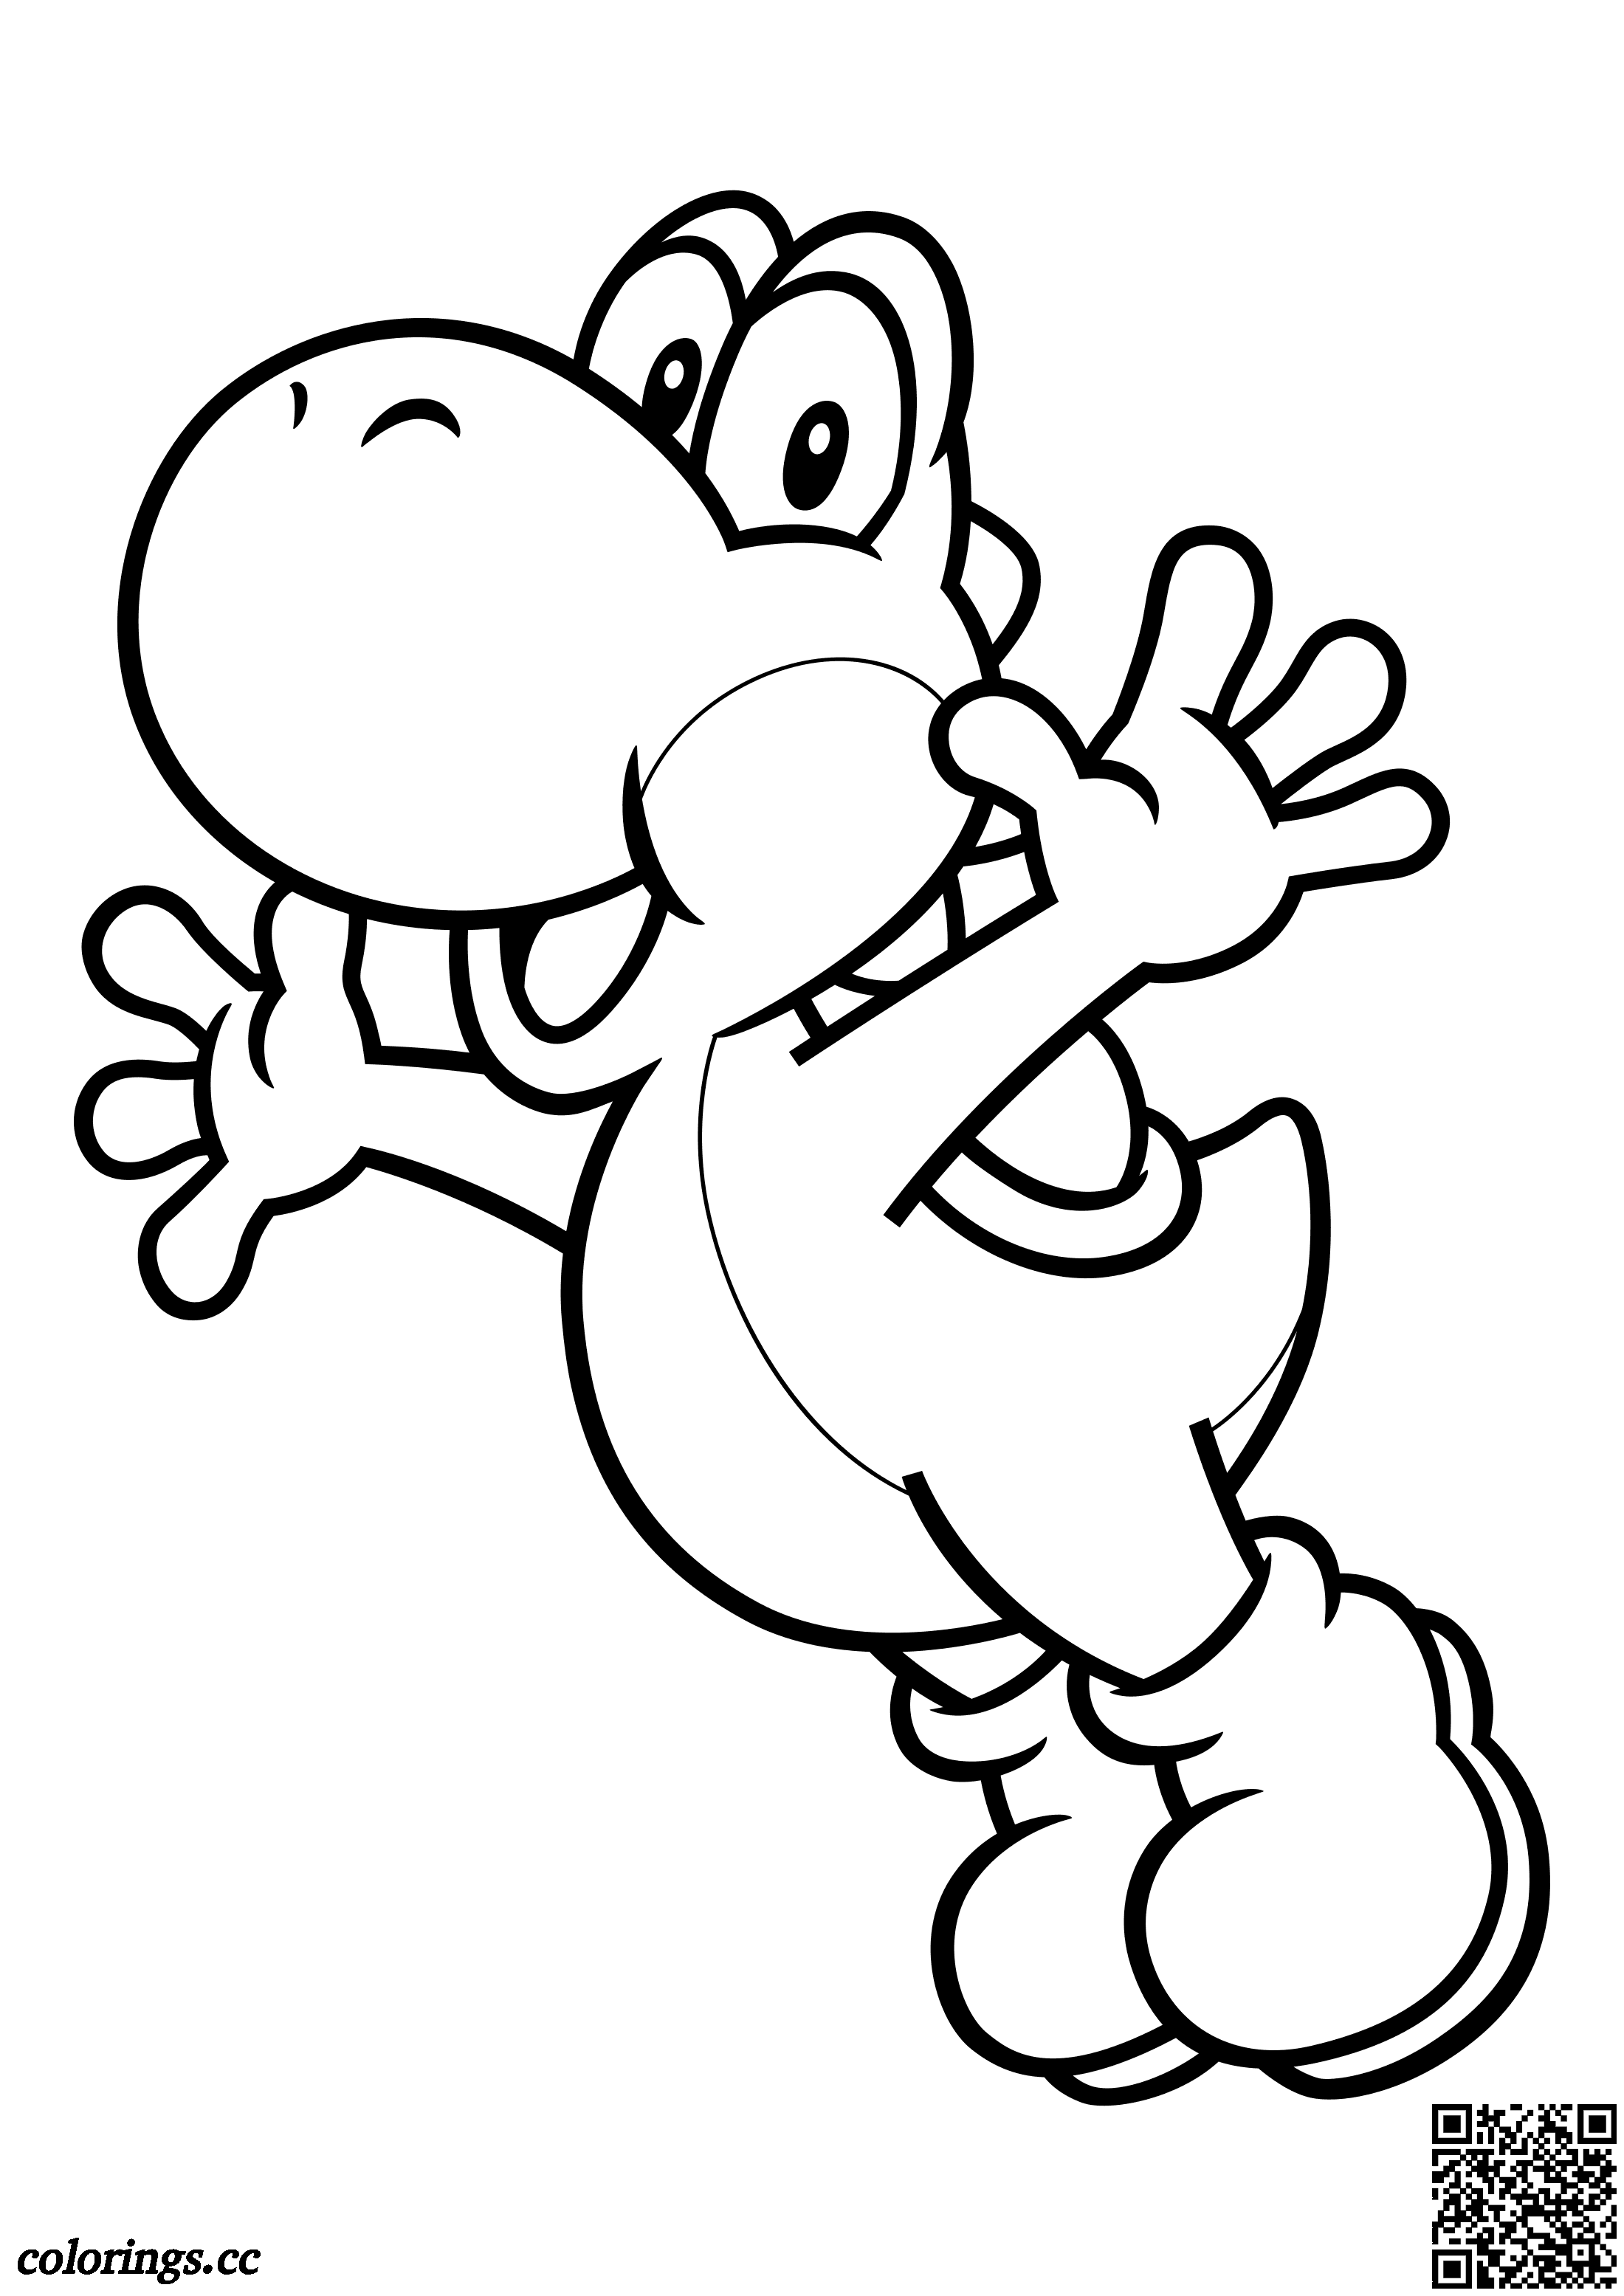 Yoshi coloring pages, Super Mario coloring pages   Colorings.cc